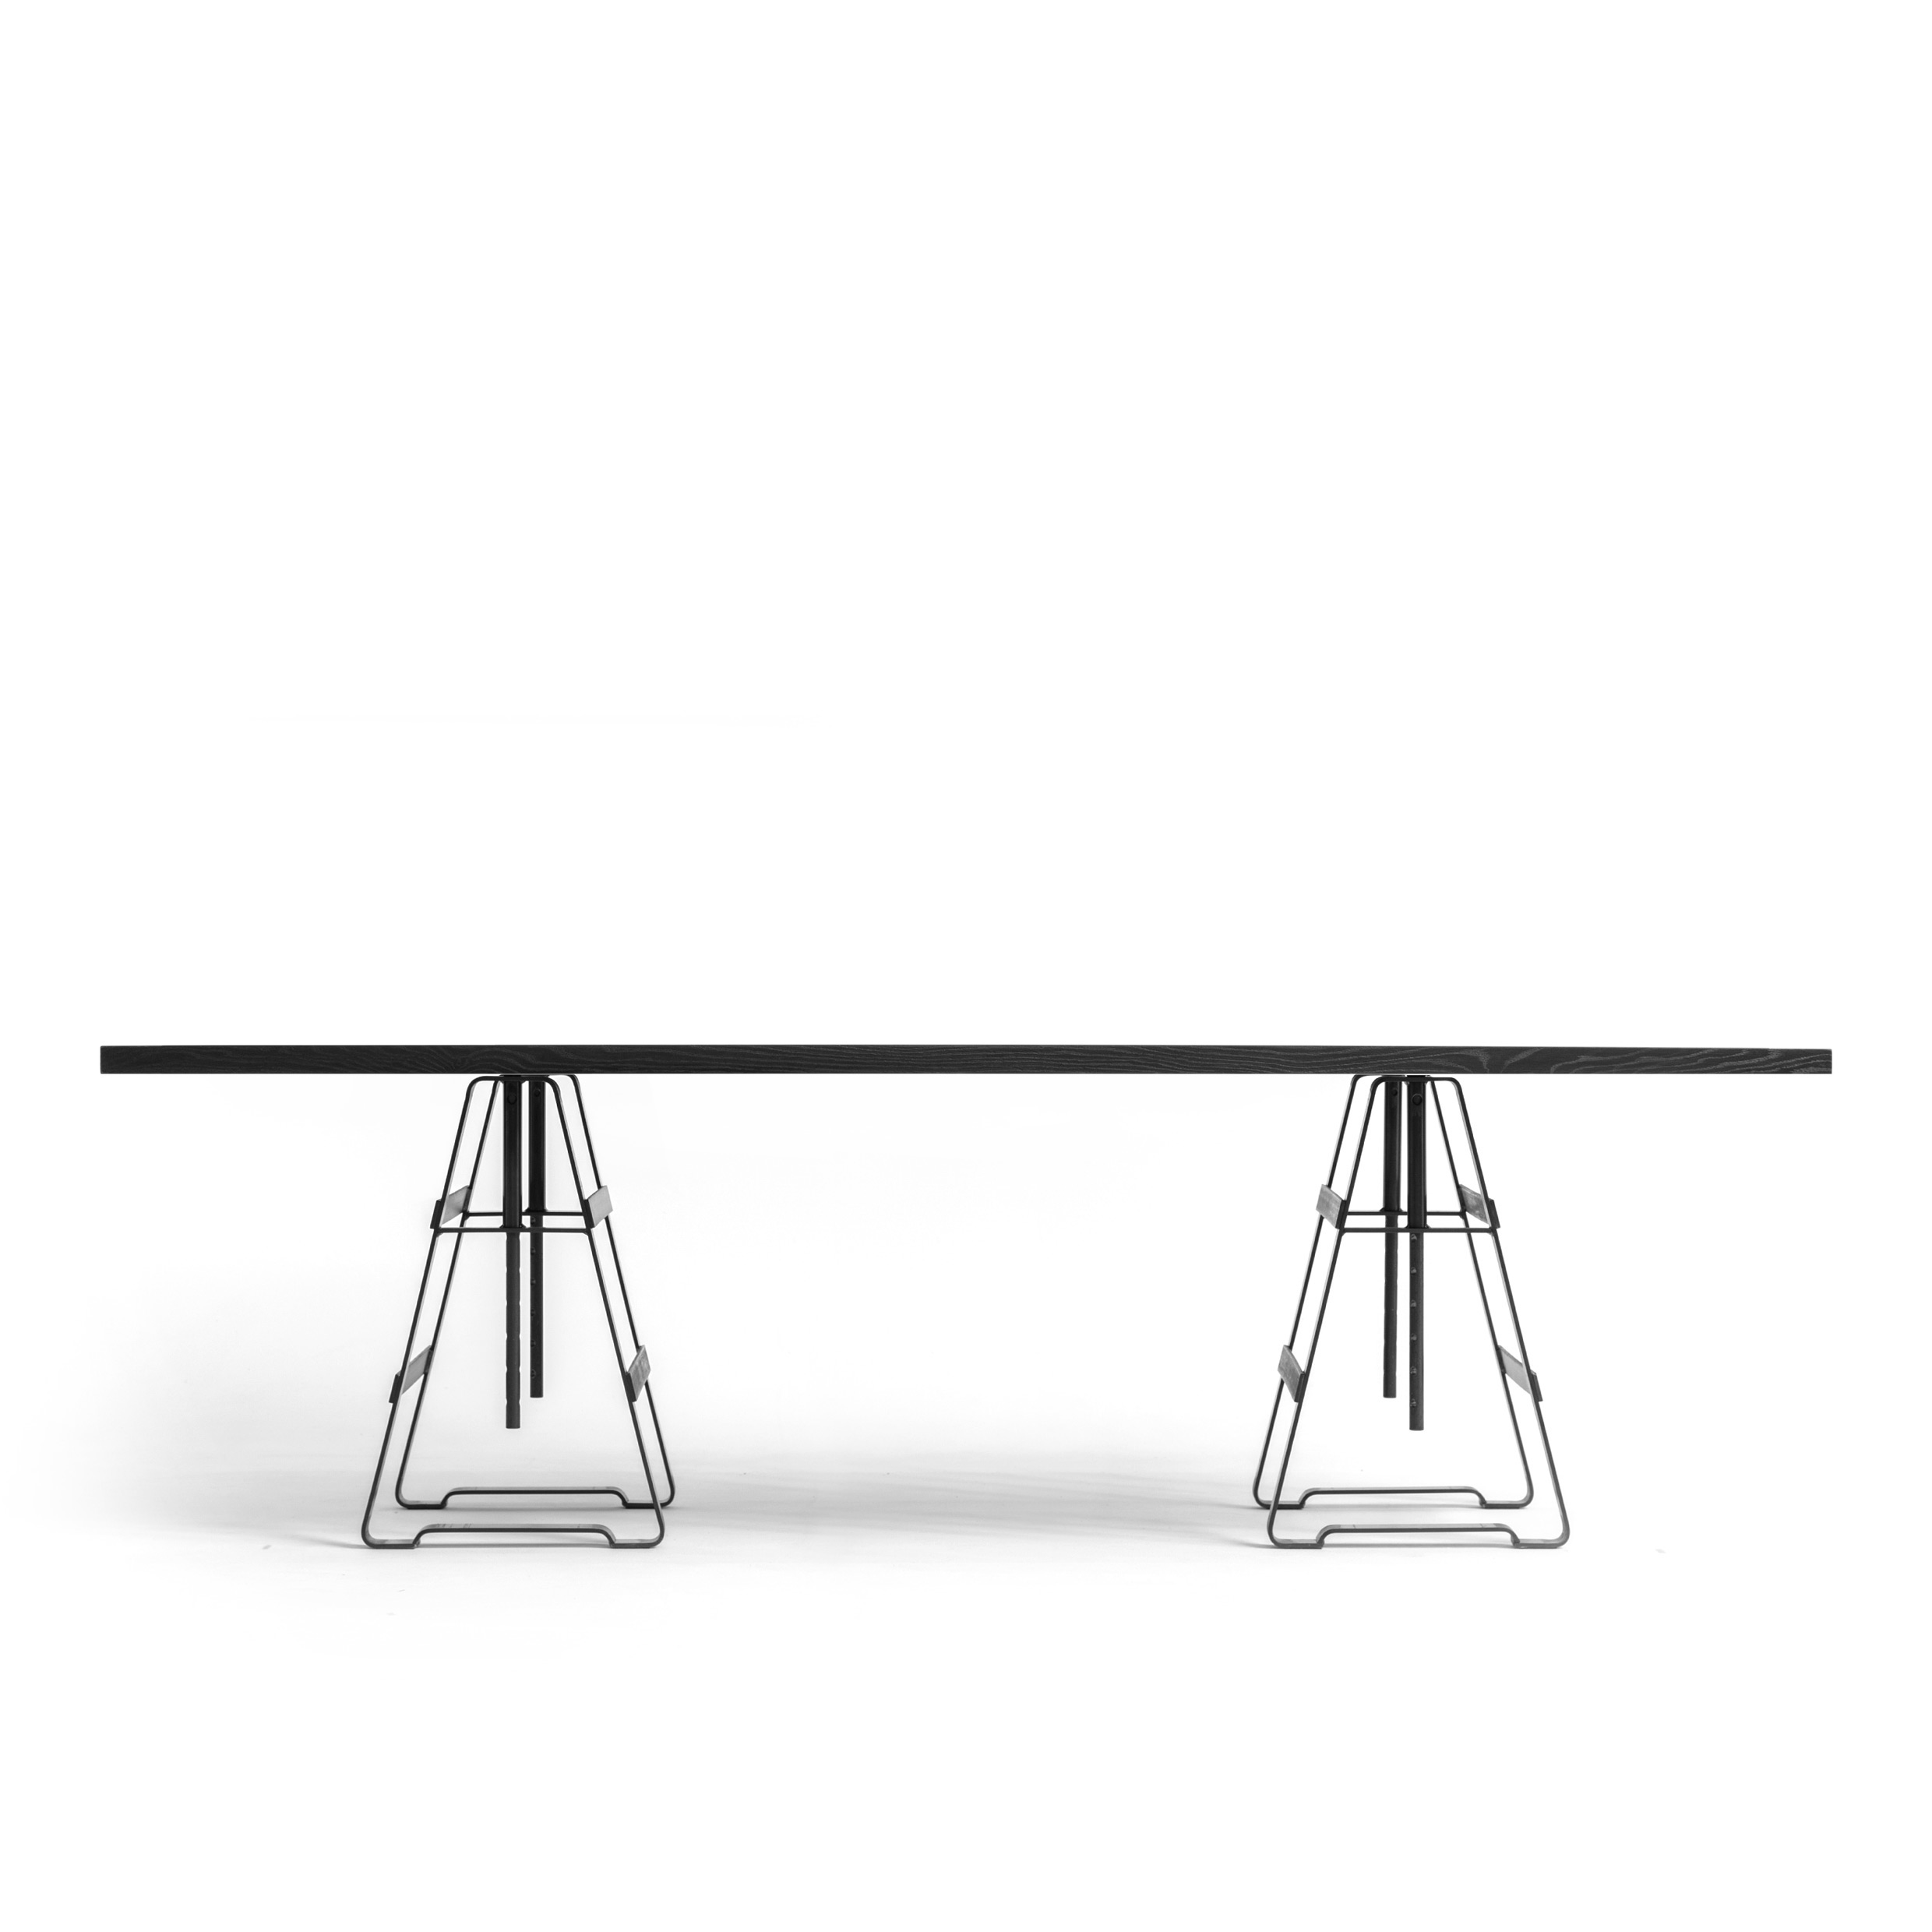 FORM EXCLUSIVE // JOON - IN-/OUTDOOR TABLE | BLACK CHARLED - 260CM X 45CM X 5CM - PAINT MONKEY BLACK